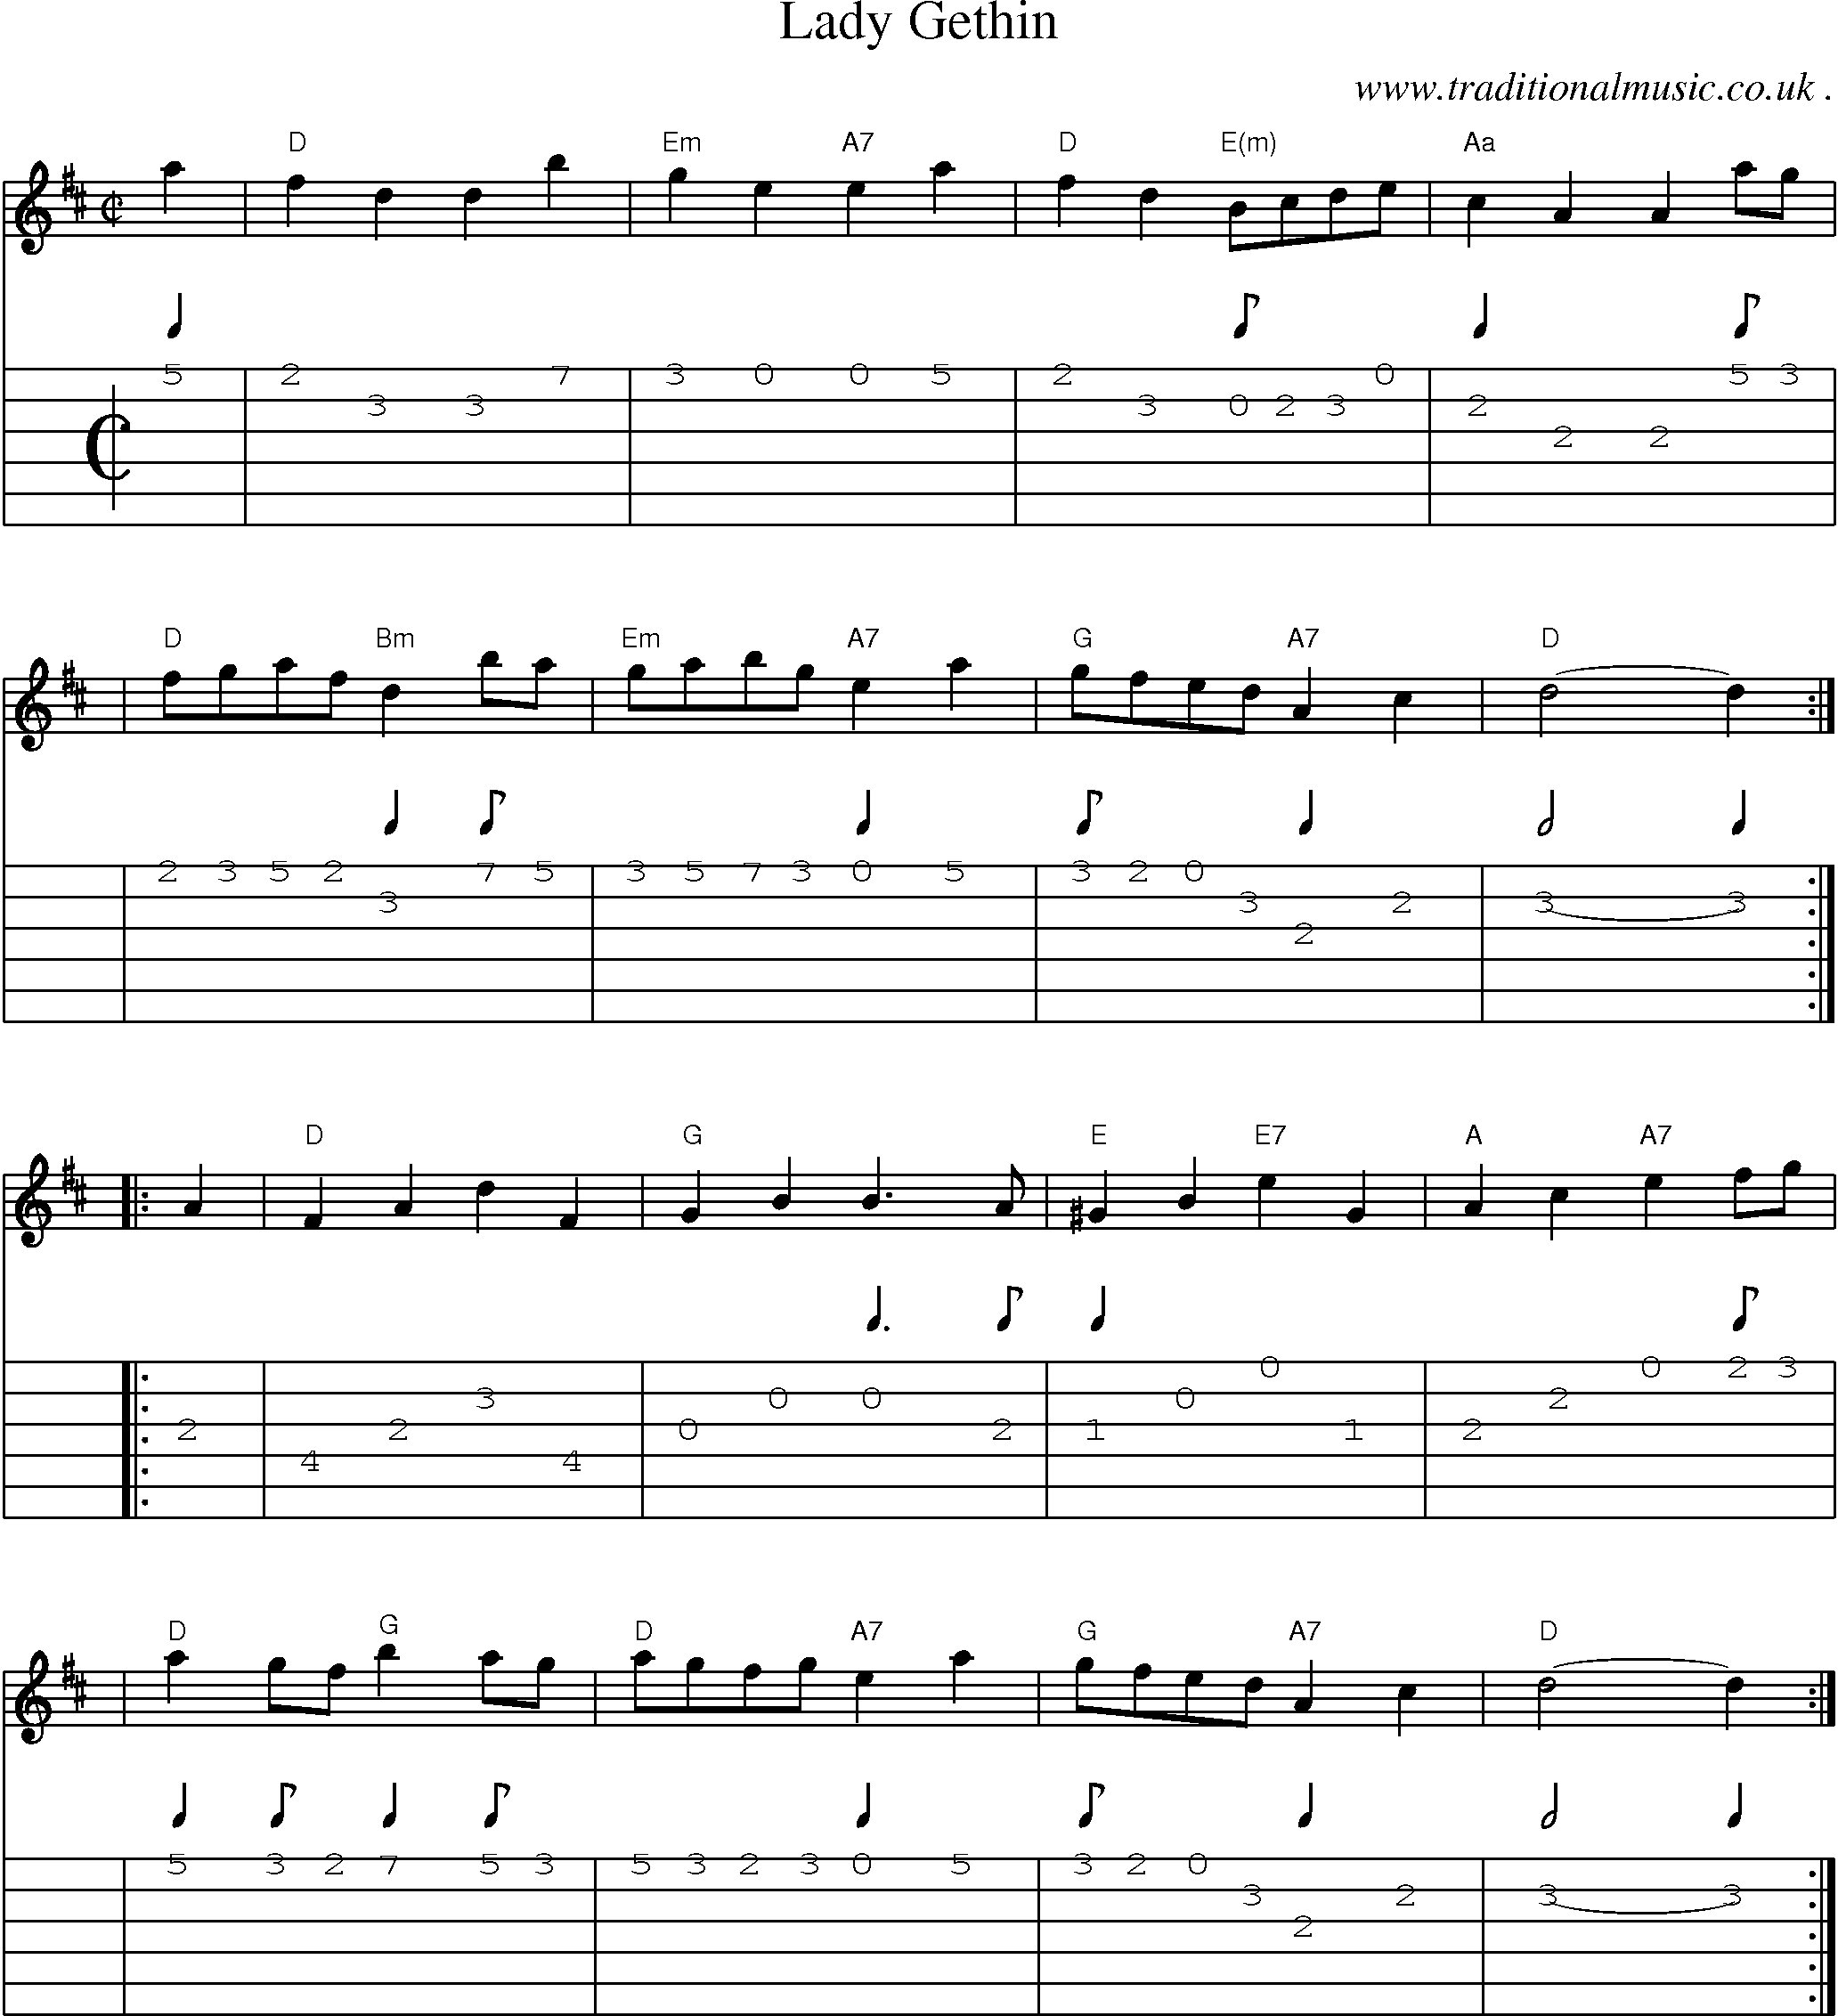 Sheet-music  score, Chords and Guitar Tabs for Lady Gethin